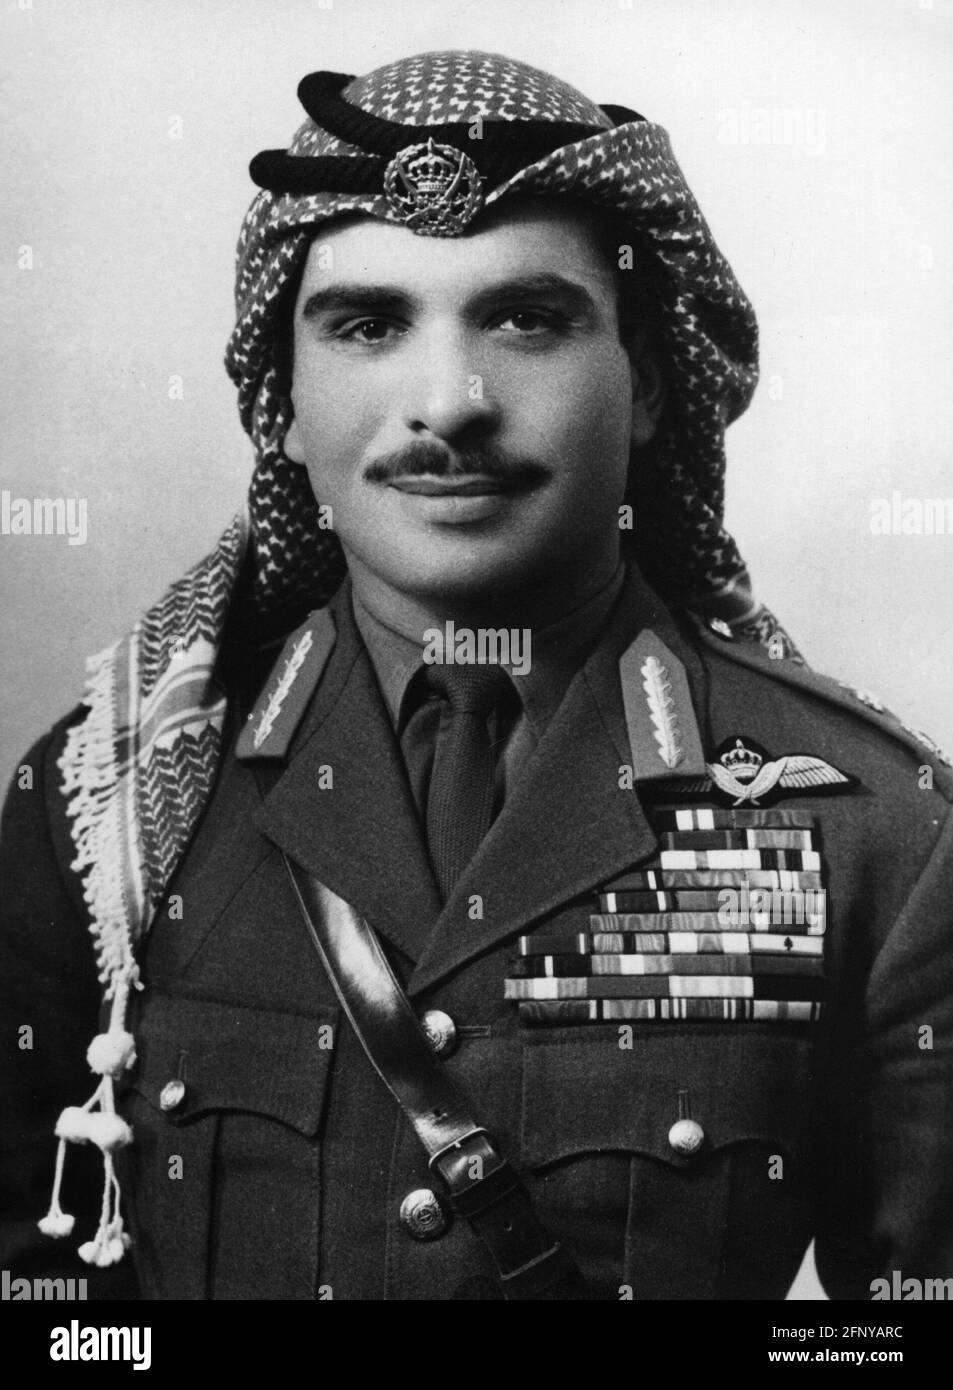 Hussein bin Talal, 14.11.1935 - 7.2.1999, King of Jordan 1952 - 1999, portrait, 1950s, ADDITIONAL-RIGHTS-CLEARANCE-INFO-NOT-AVAILABLE Stock Photo